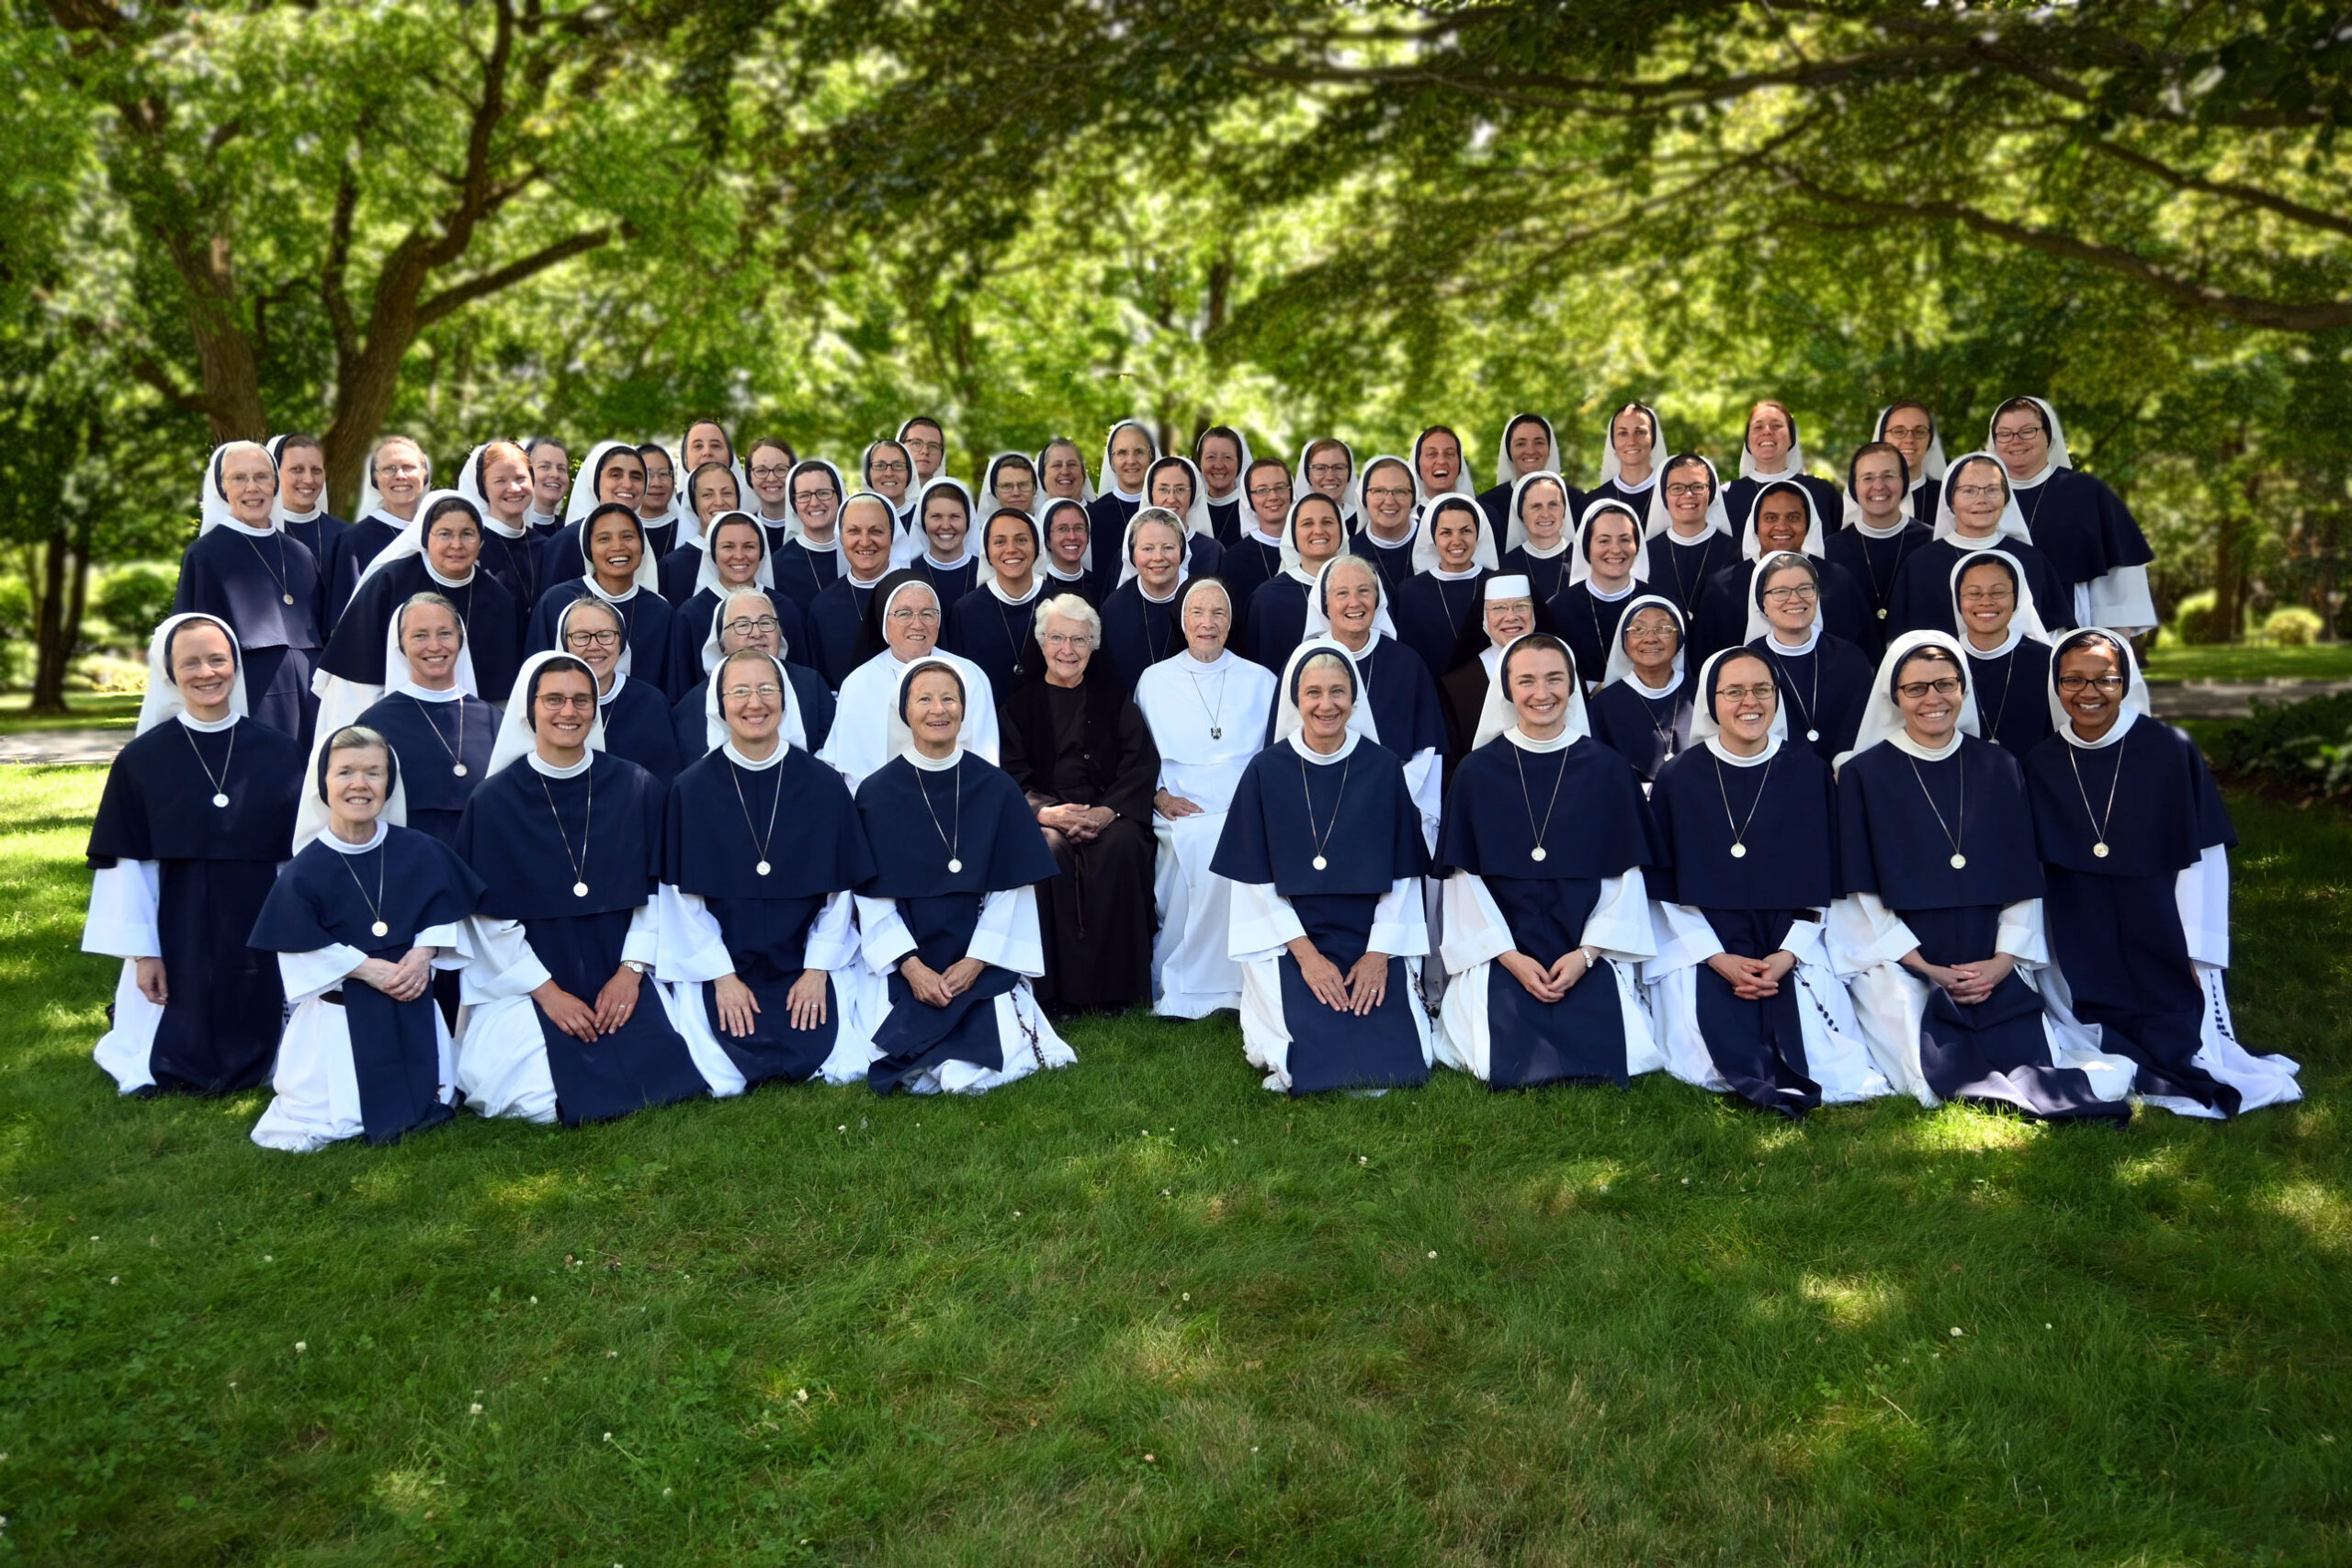 What’s in a Name: Sr. Mariam Caritas